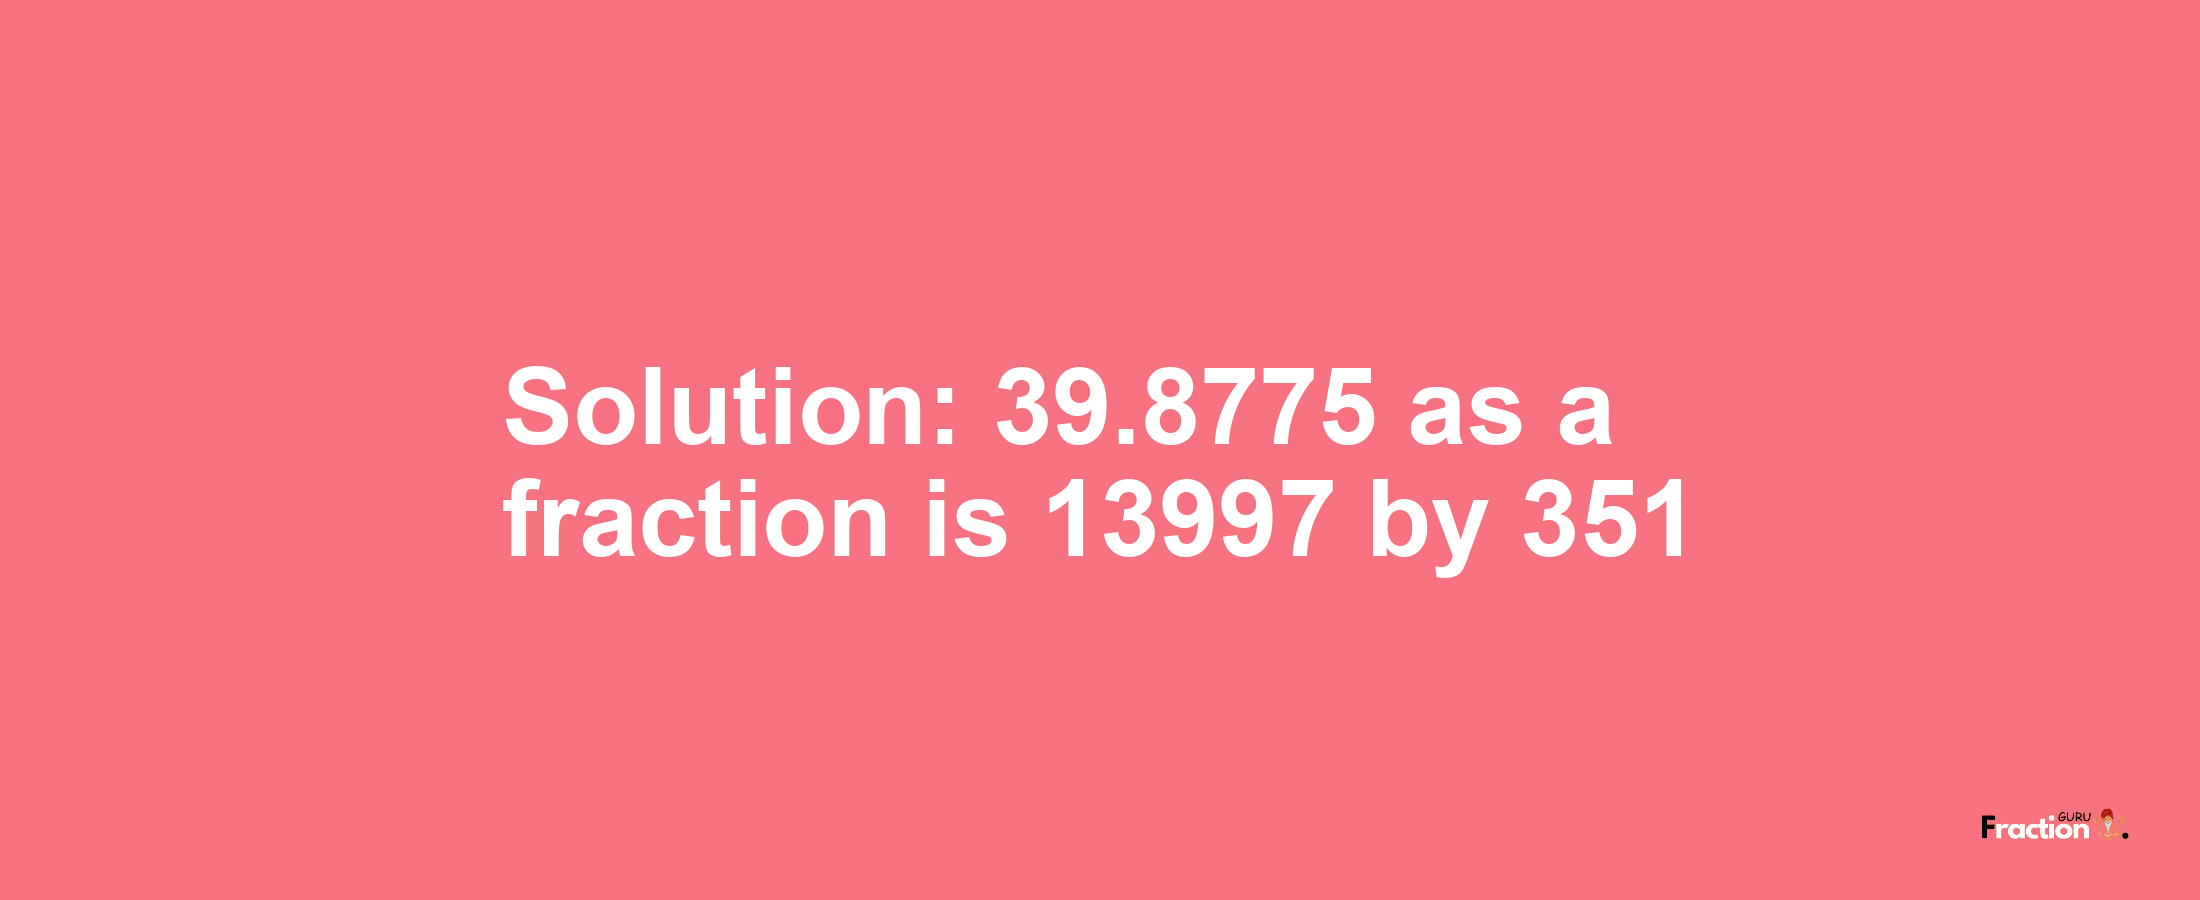 Solution:39.8775 as a fraction is 13997/351